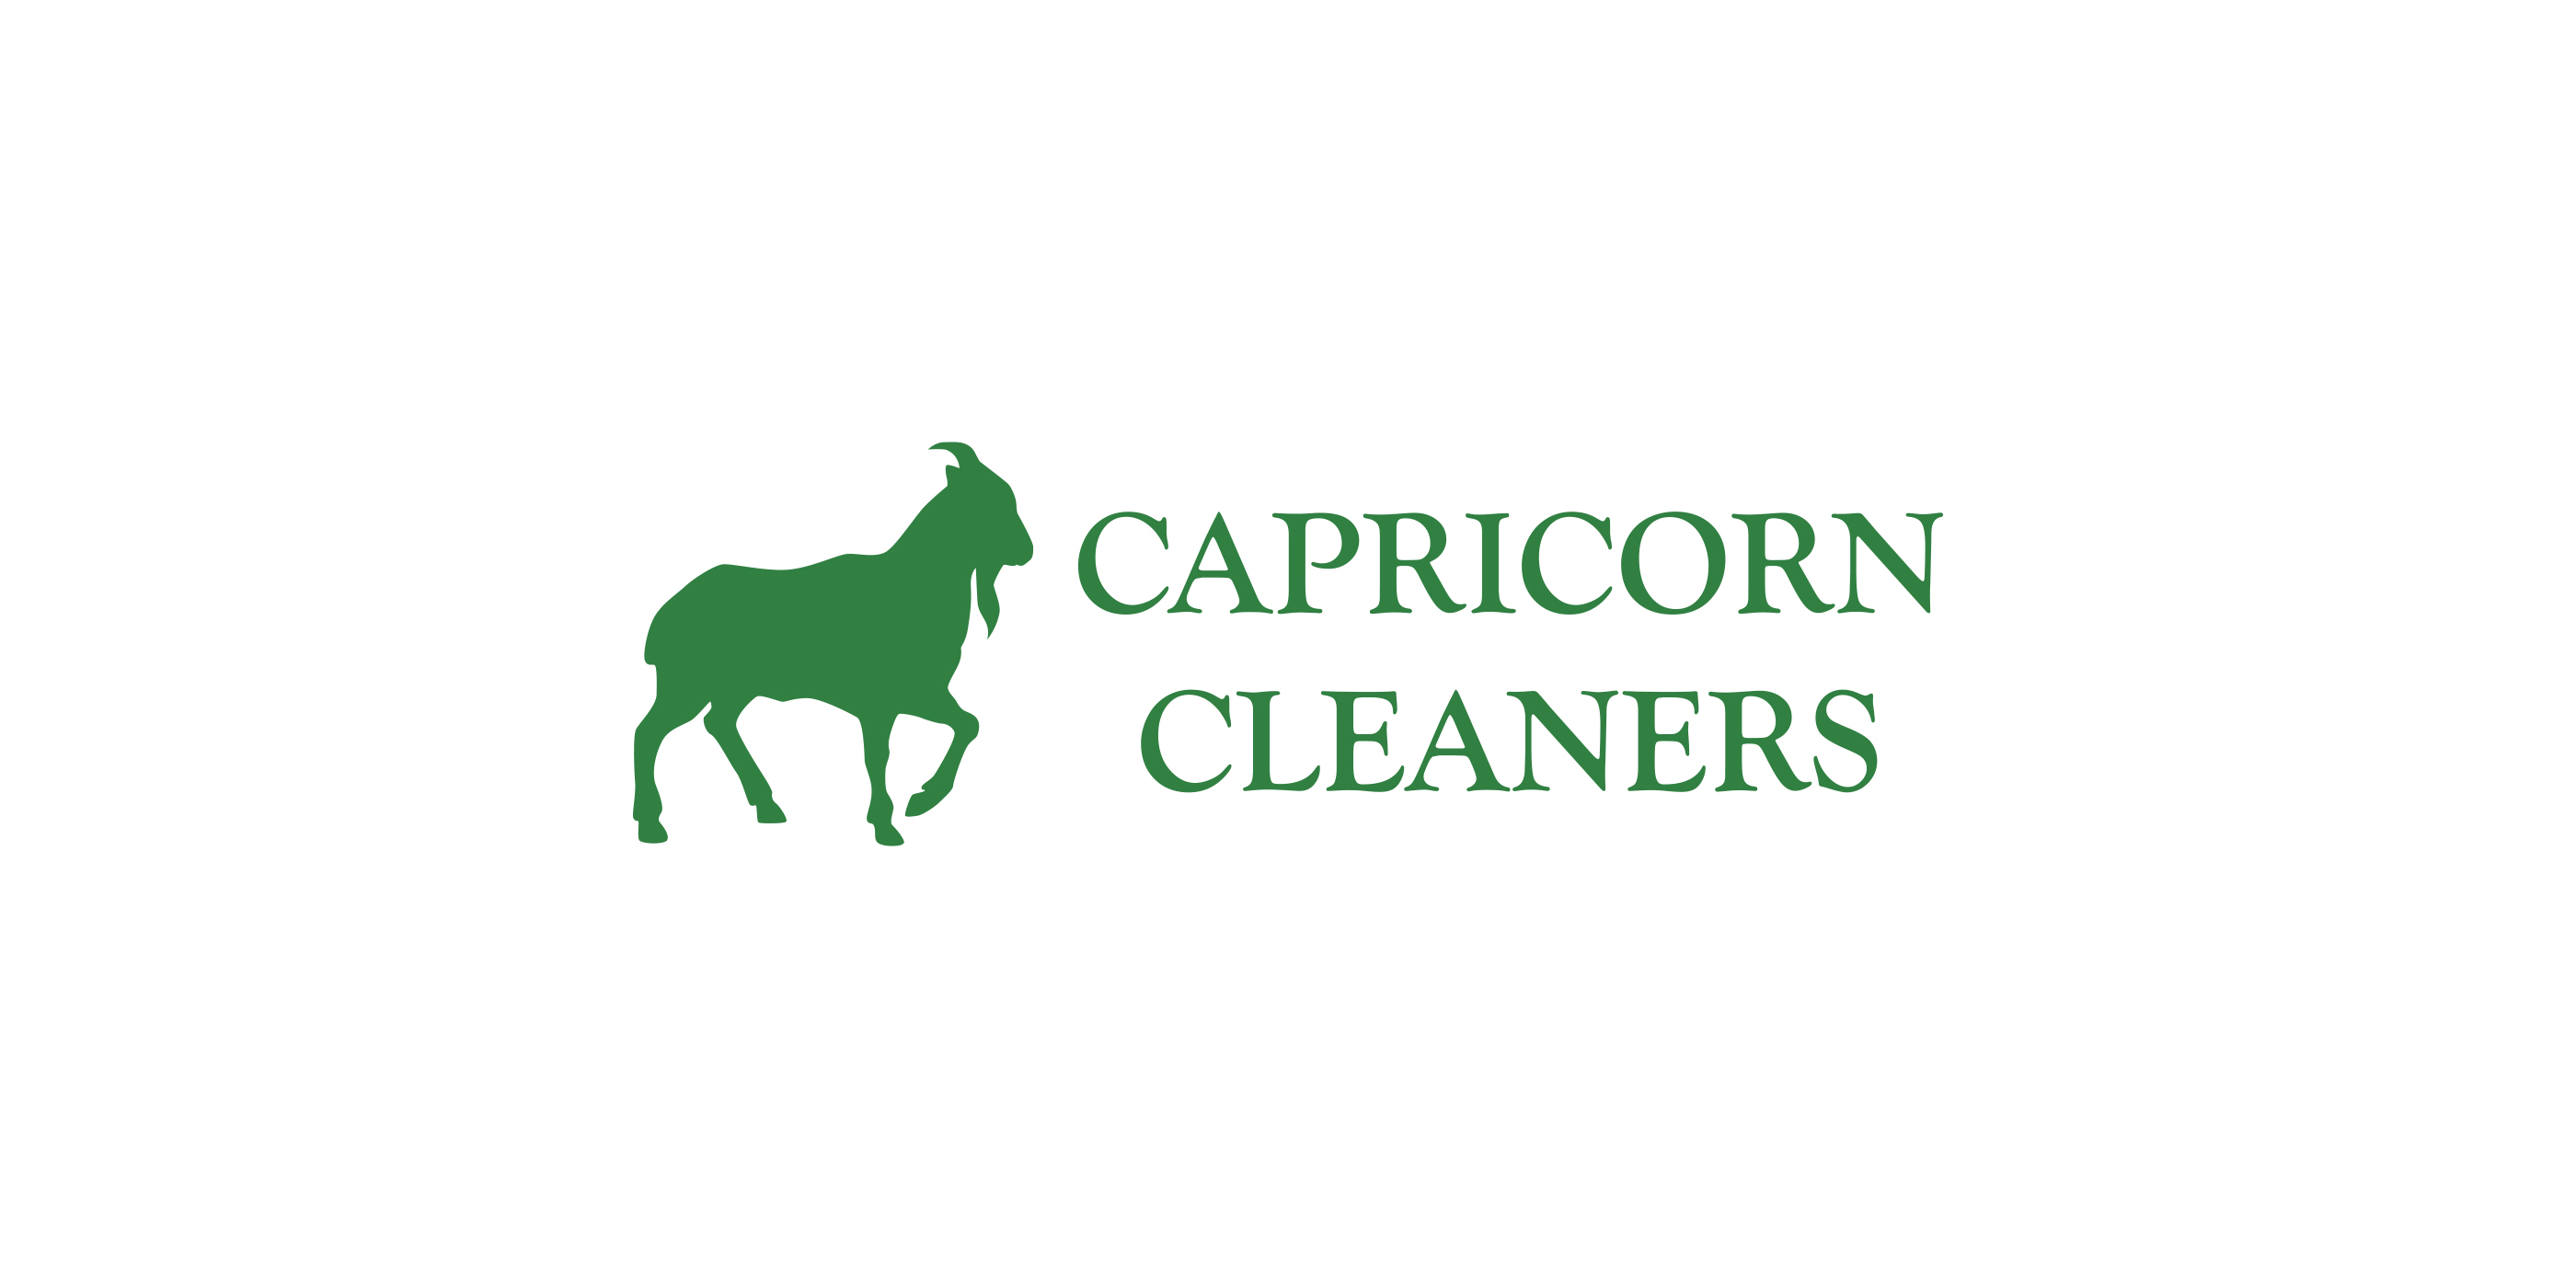 Capricorn Cleaners, print design and website design